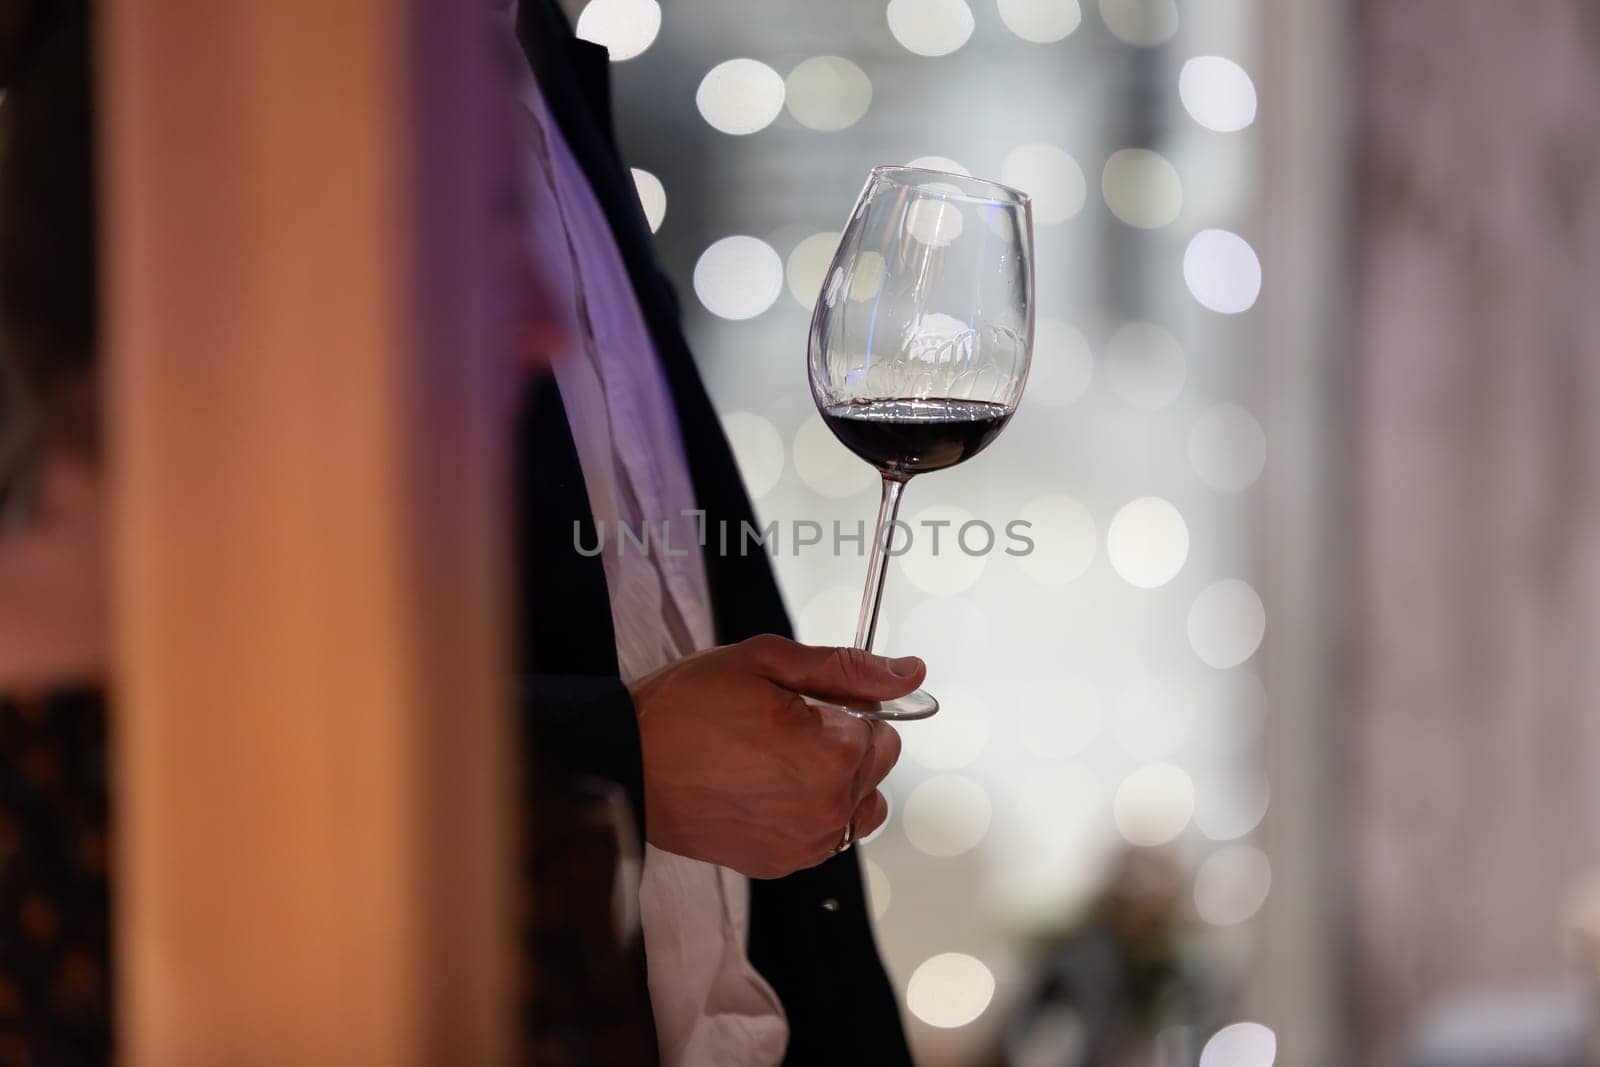 A formally dressed individual holding a wine glass, portraying a sense of sophistication.